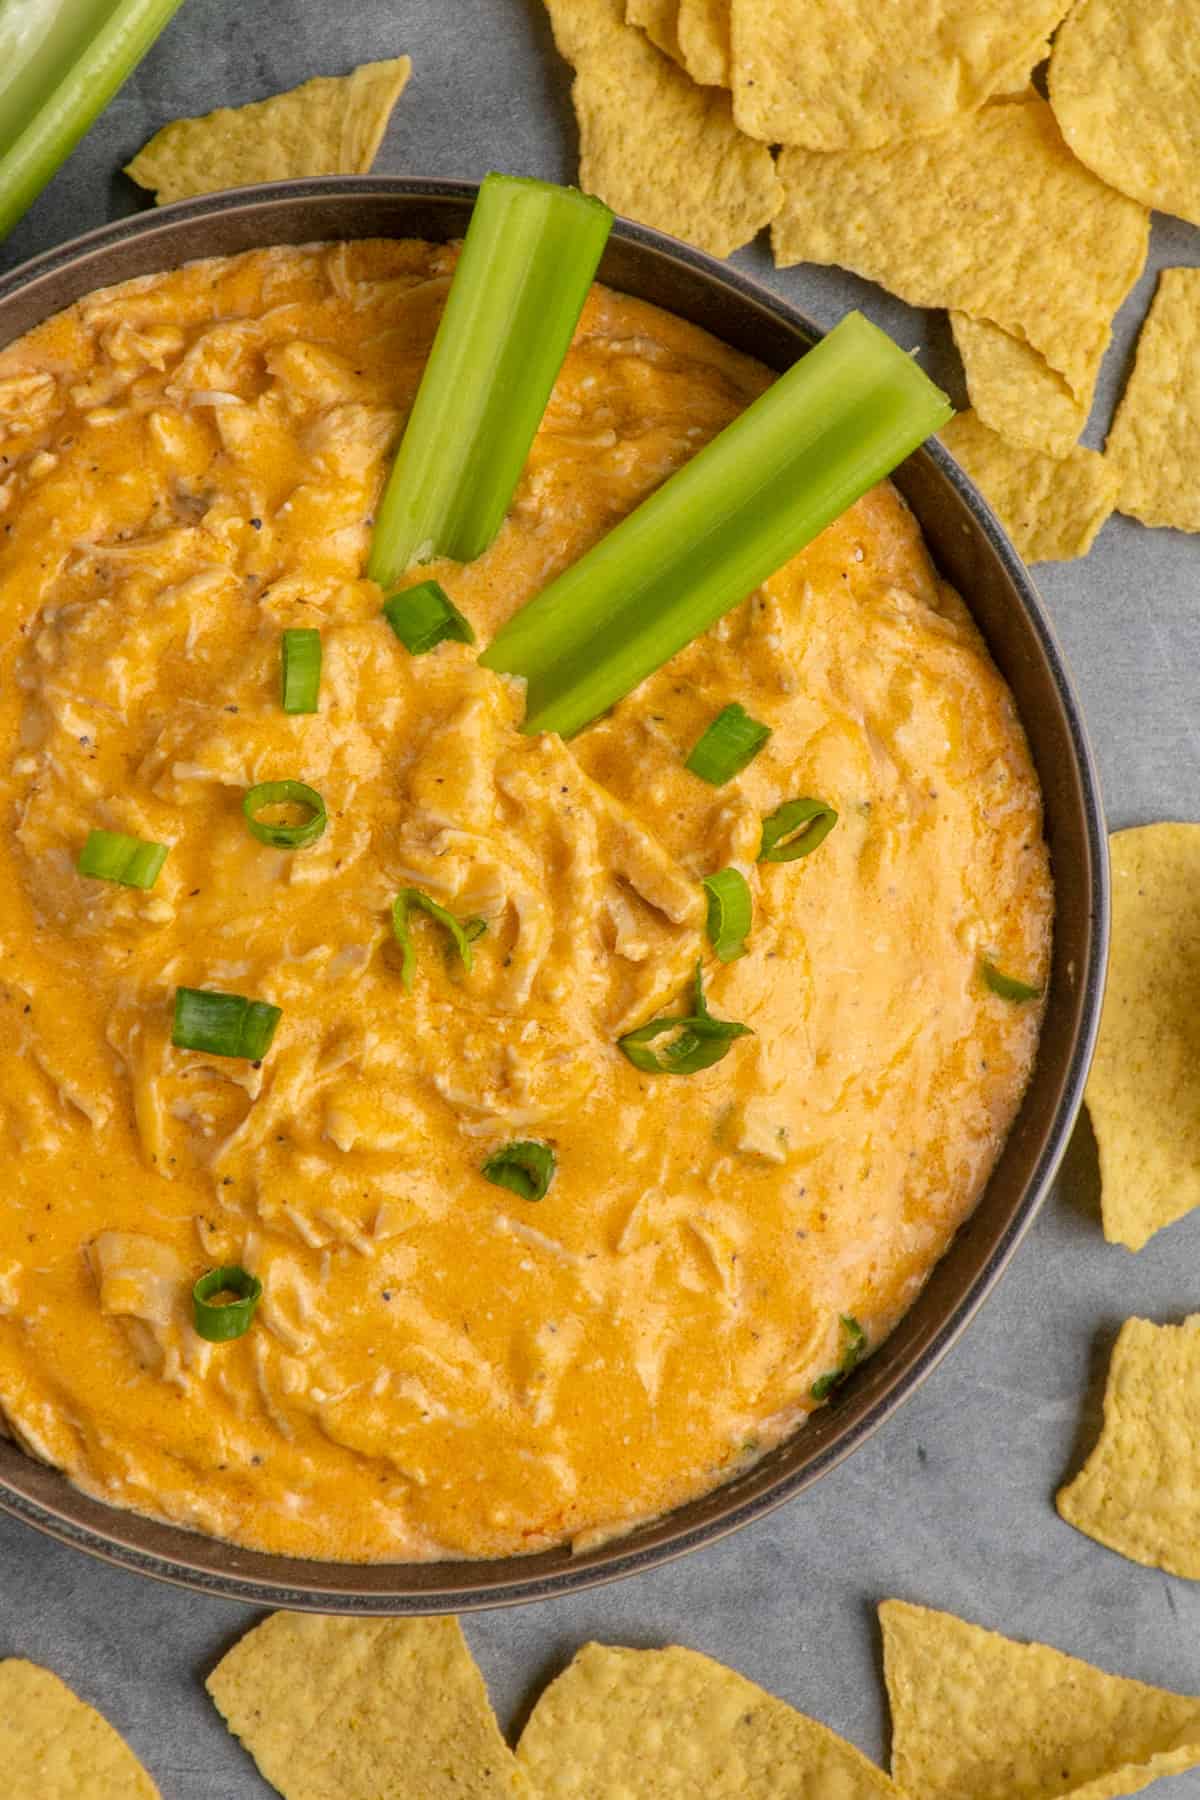 Overhead look at Crock Pot buffalo chicken dip in a grey bowl surrounded by tortilla chips.